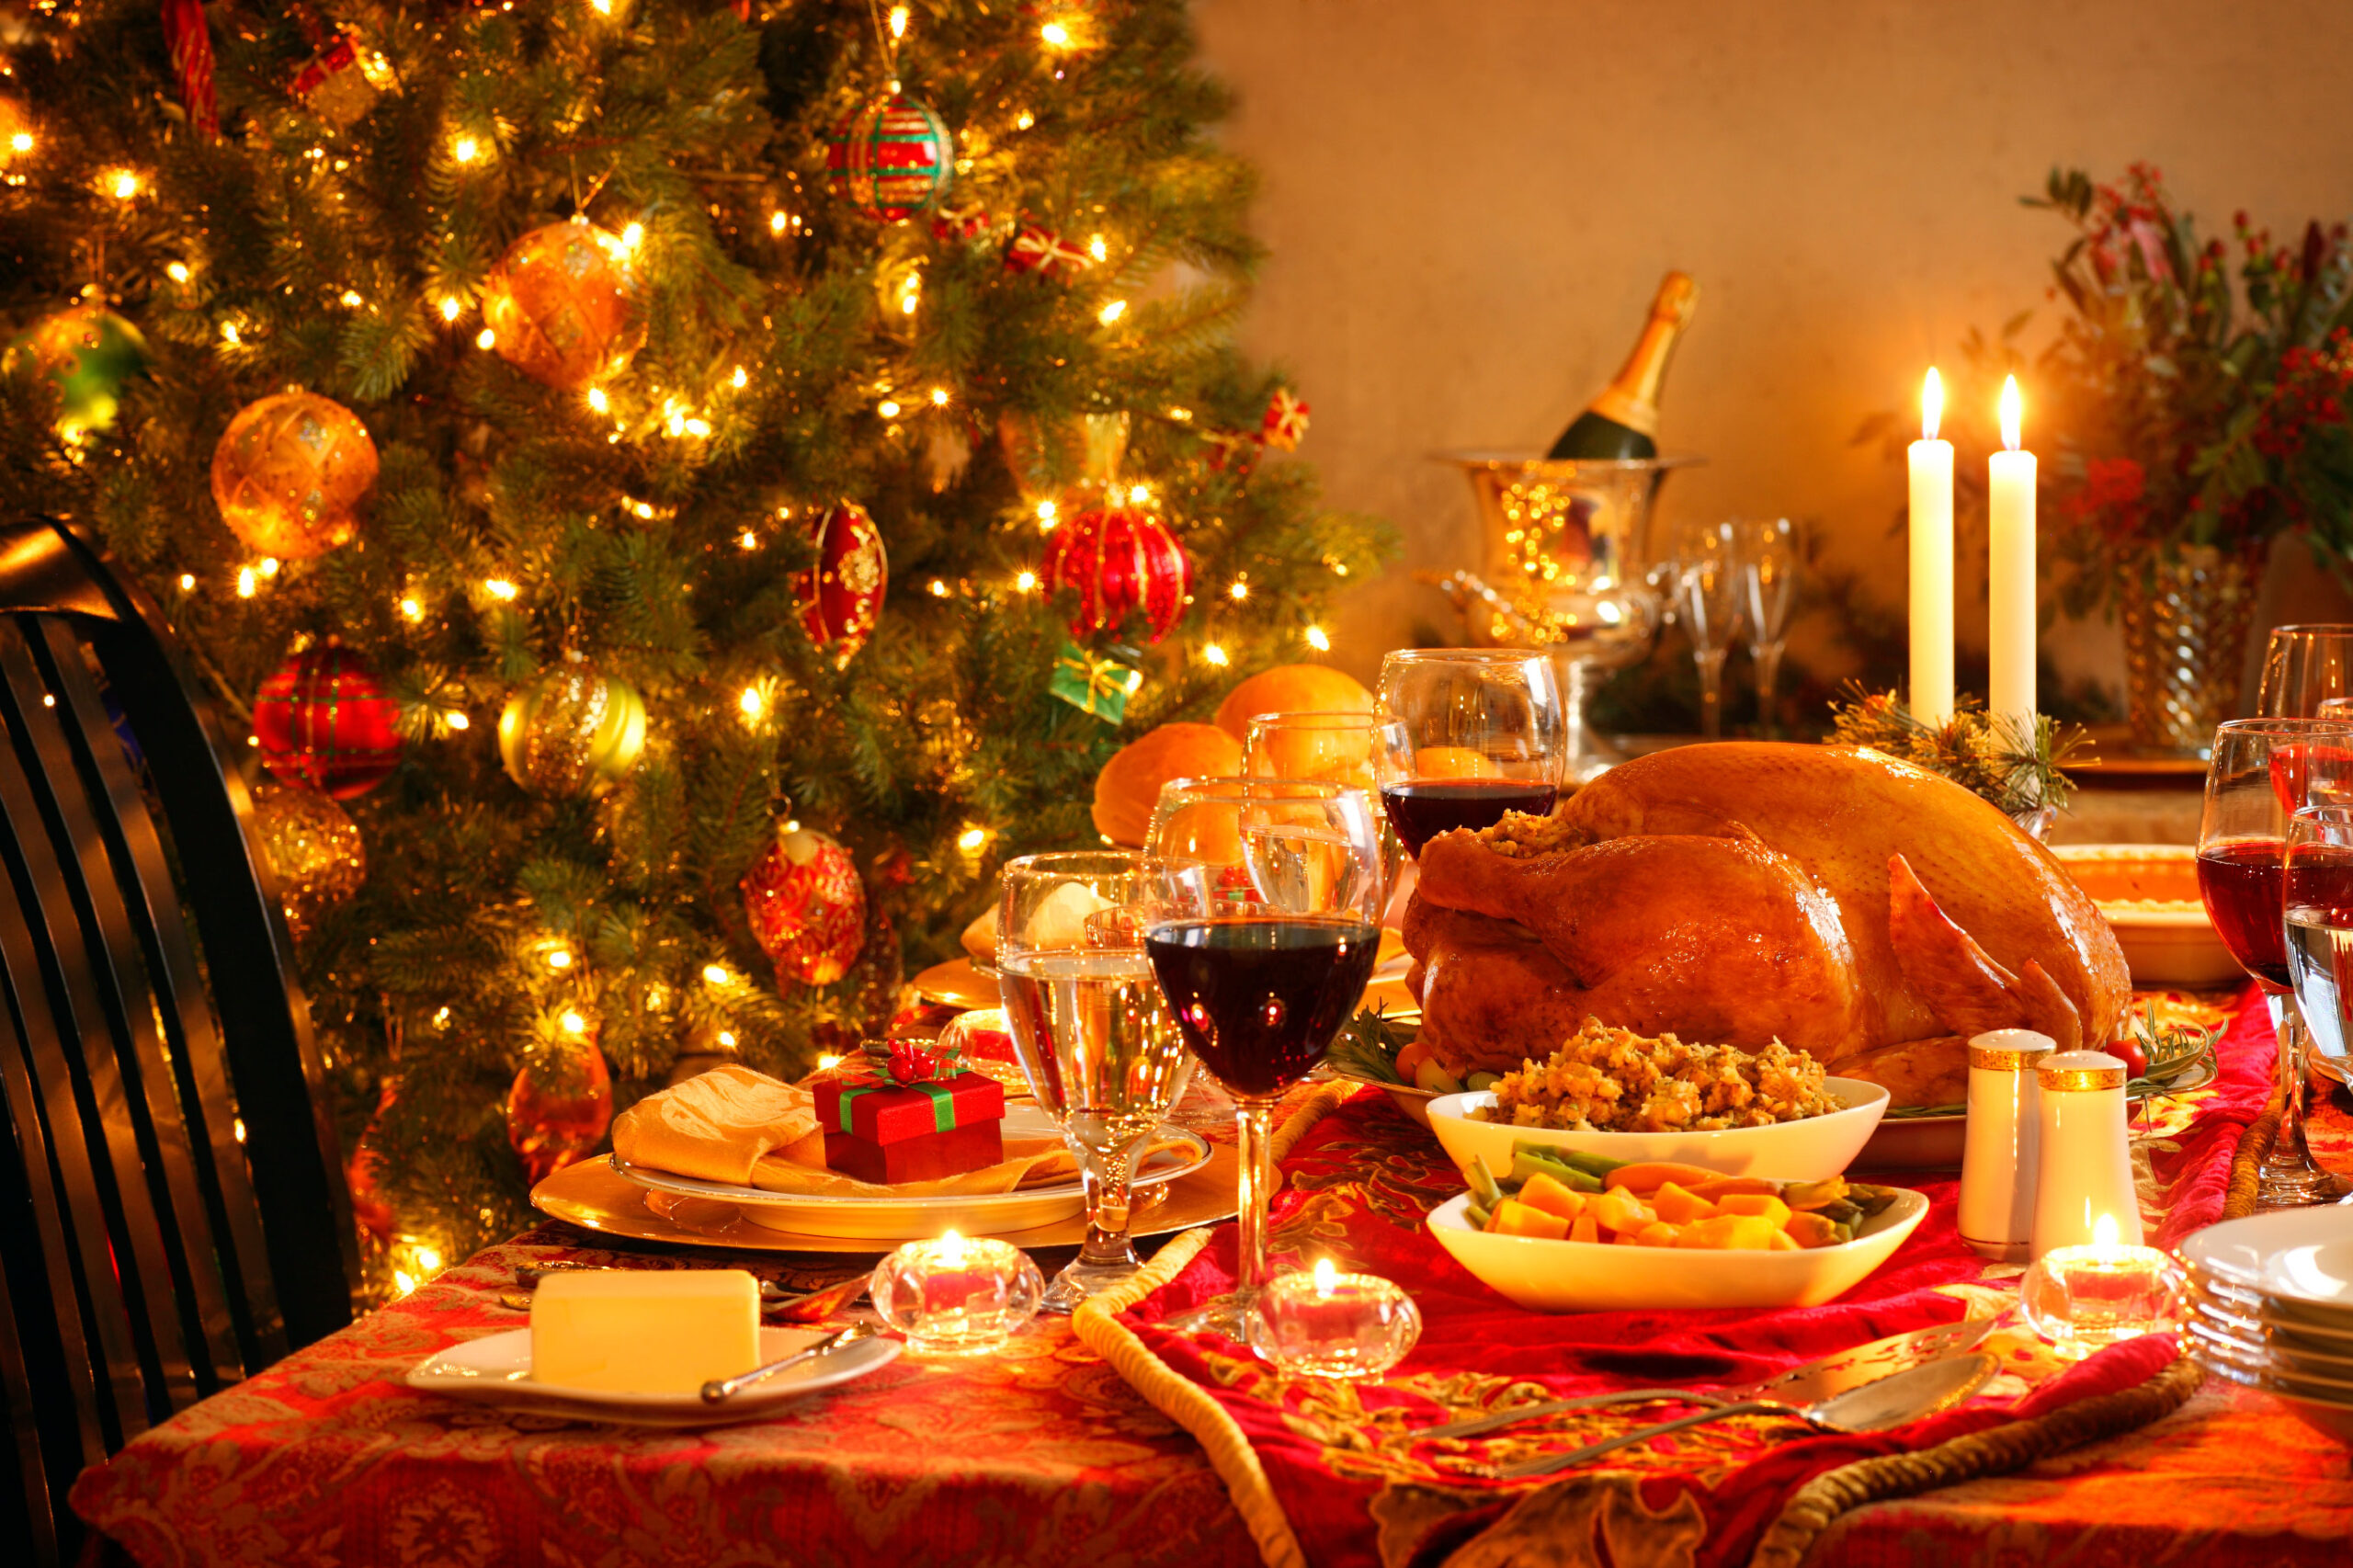 christmas dinner table 2716x1810 wines to enjoy with your christmas dinner lifestyle club together urumix.com scaled